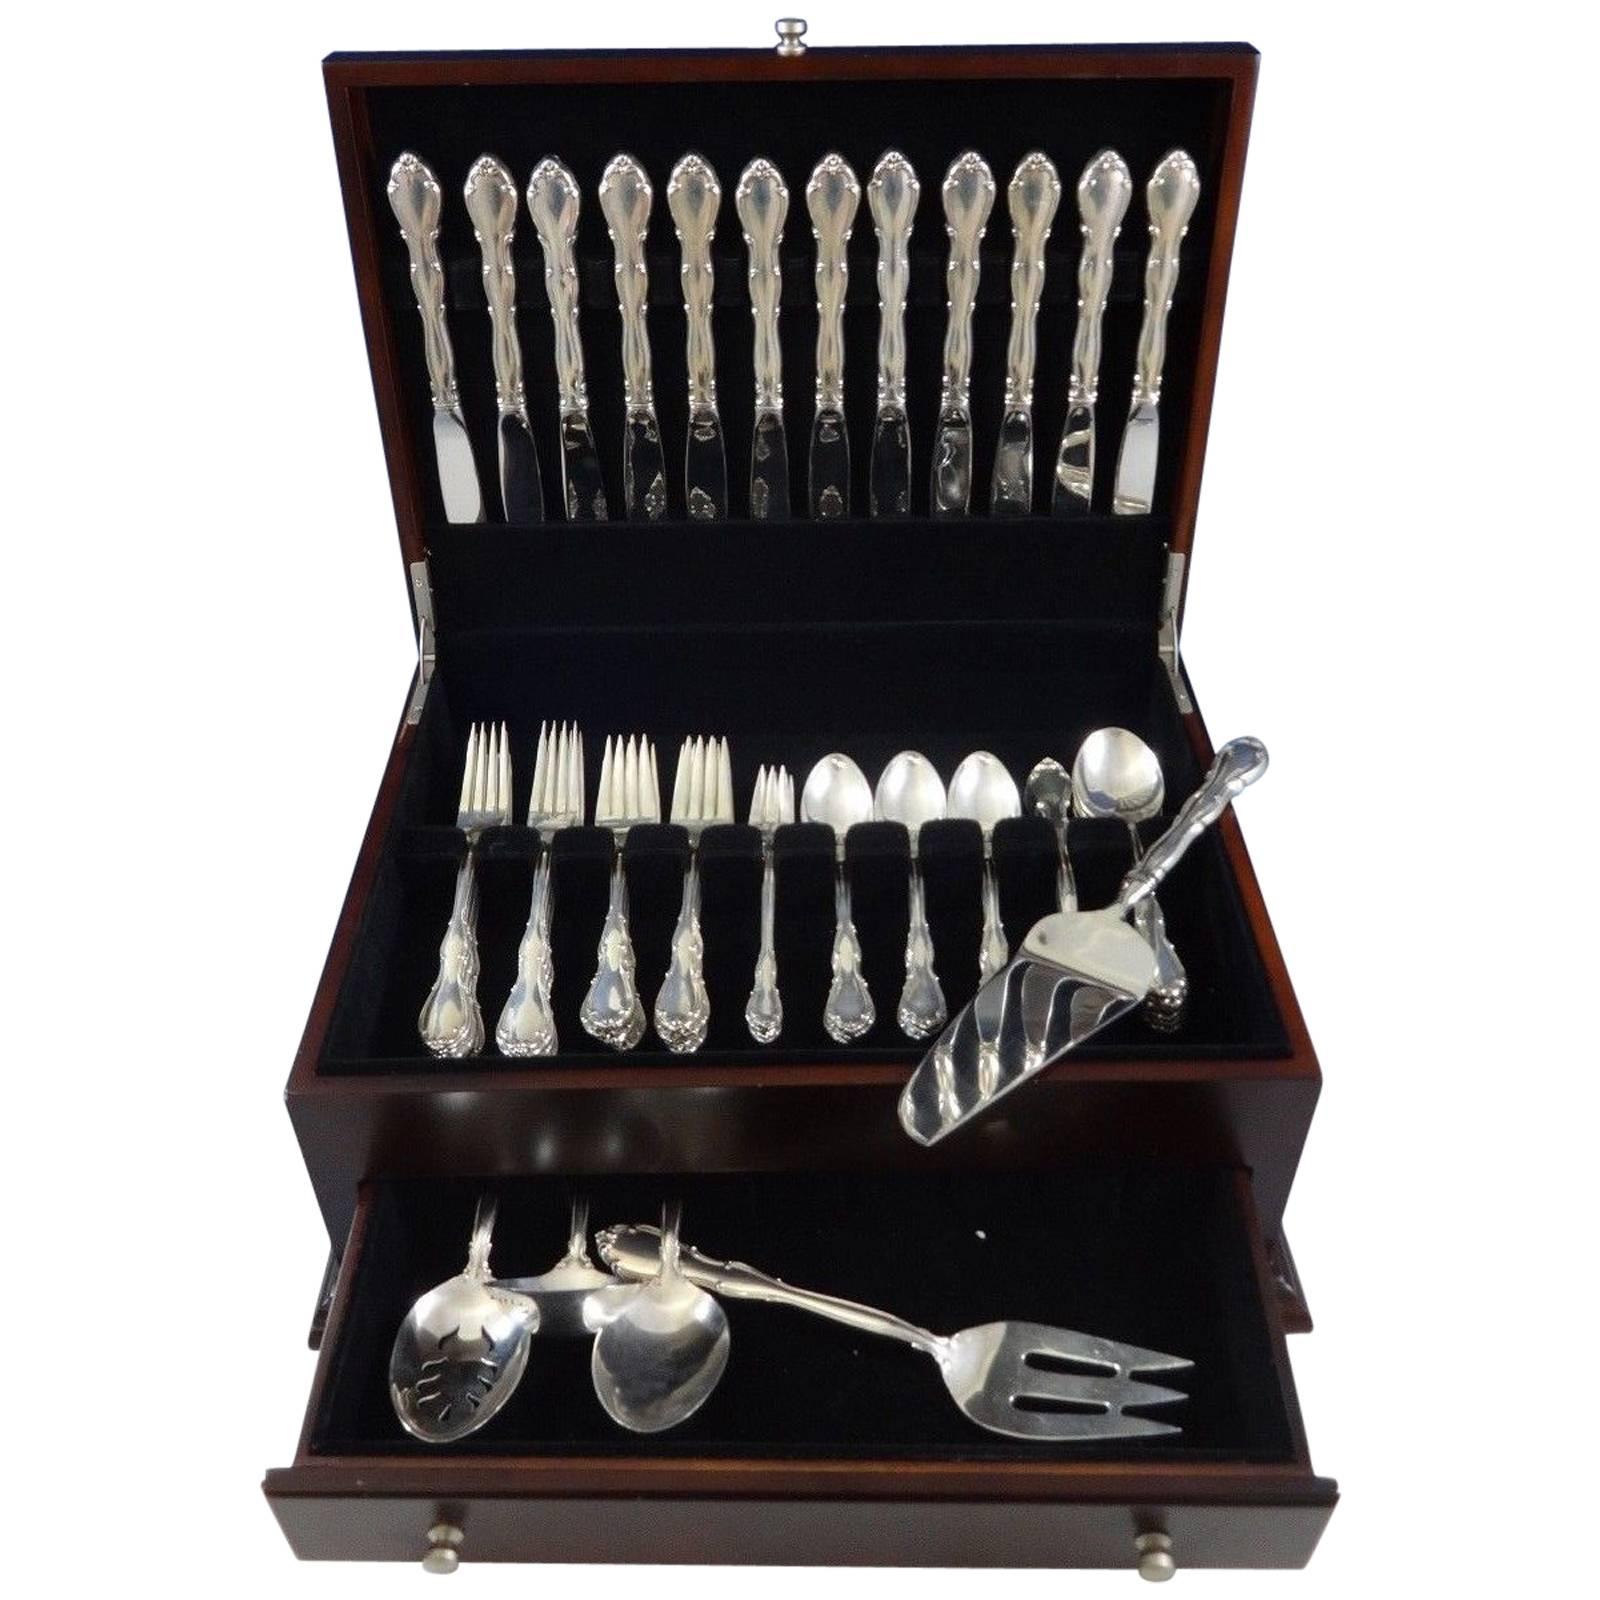 Fontana by Towle sterling silver flatware set, 77 pieces. This set includes: 

12 knives, 8 7/8